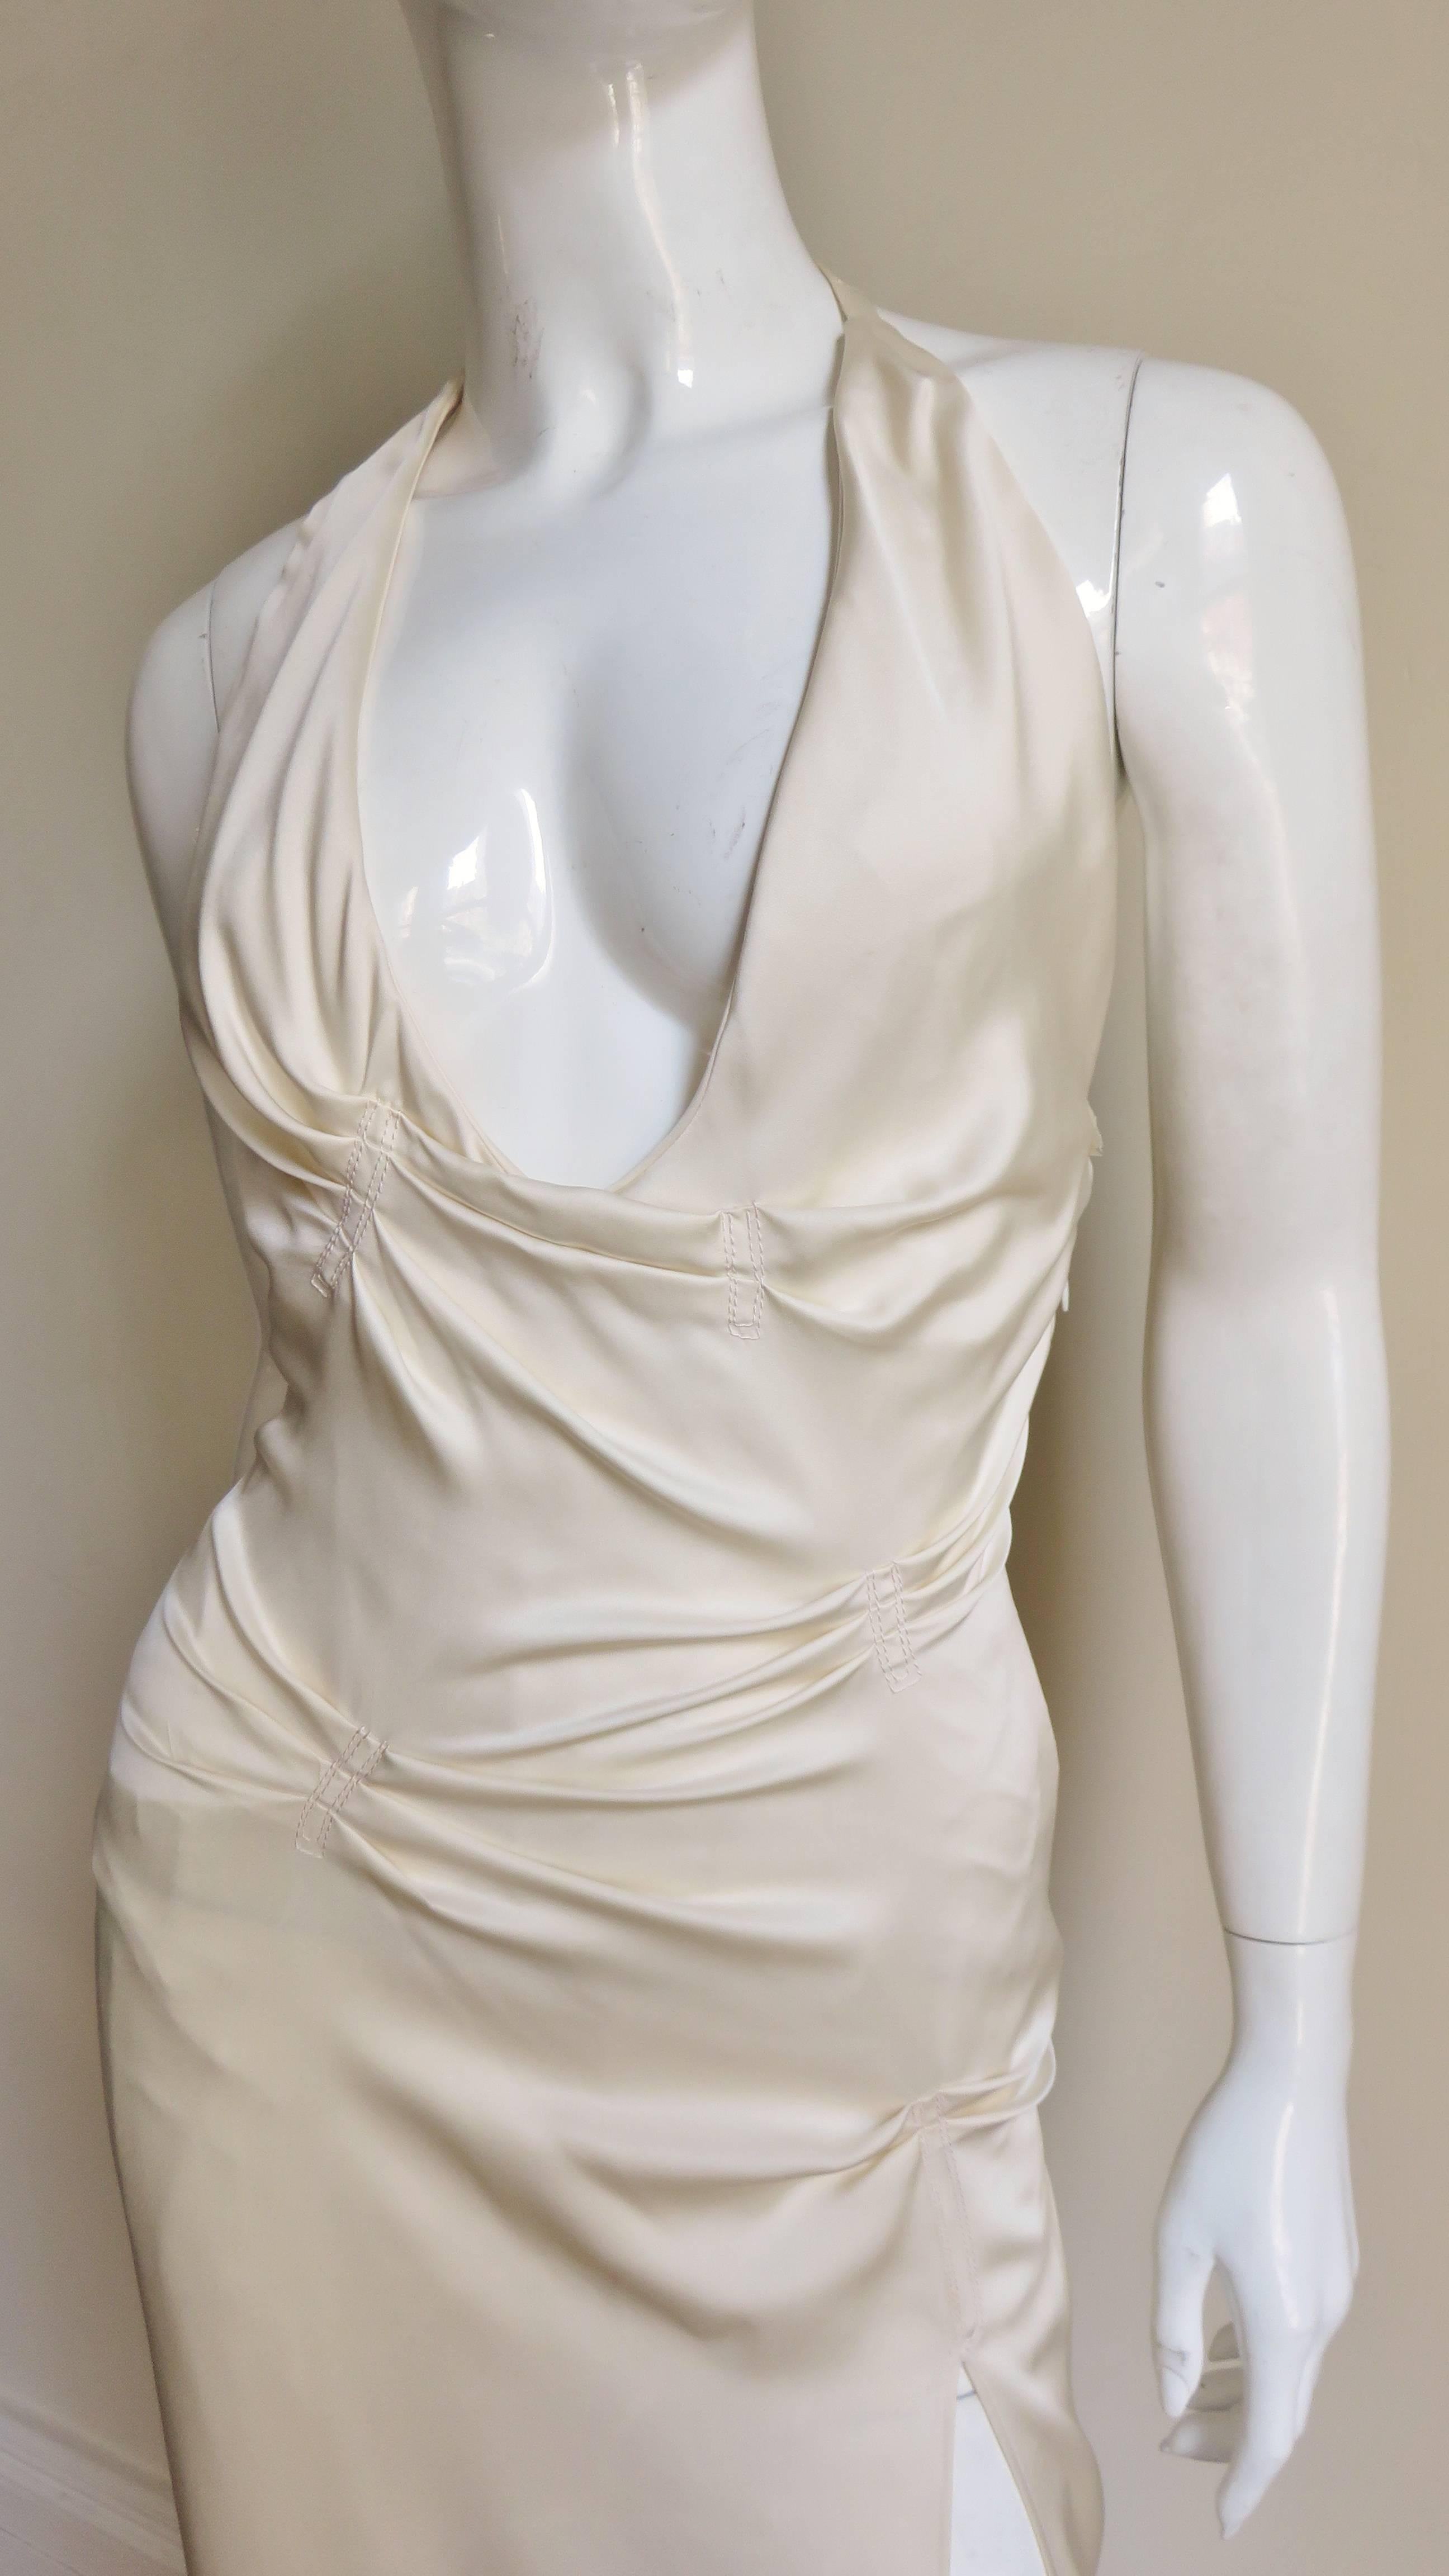 An incredible Ivory silk gown from Gianni Versace.  It is halter style with a plunging neckline and tucks placed off center at the bust waist and hips.  There is a thigh high slit along one leg revealing a white abstract line netting gore